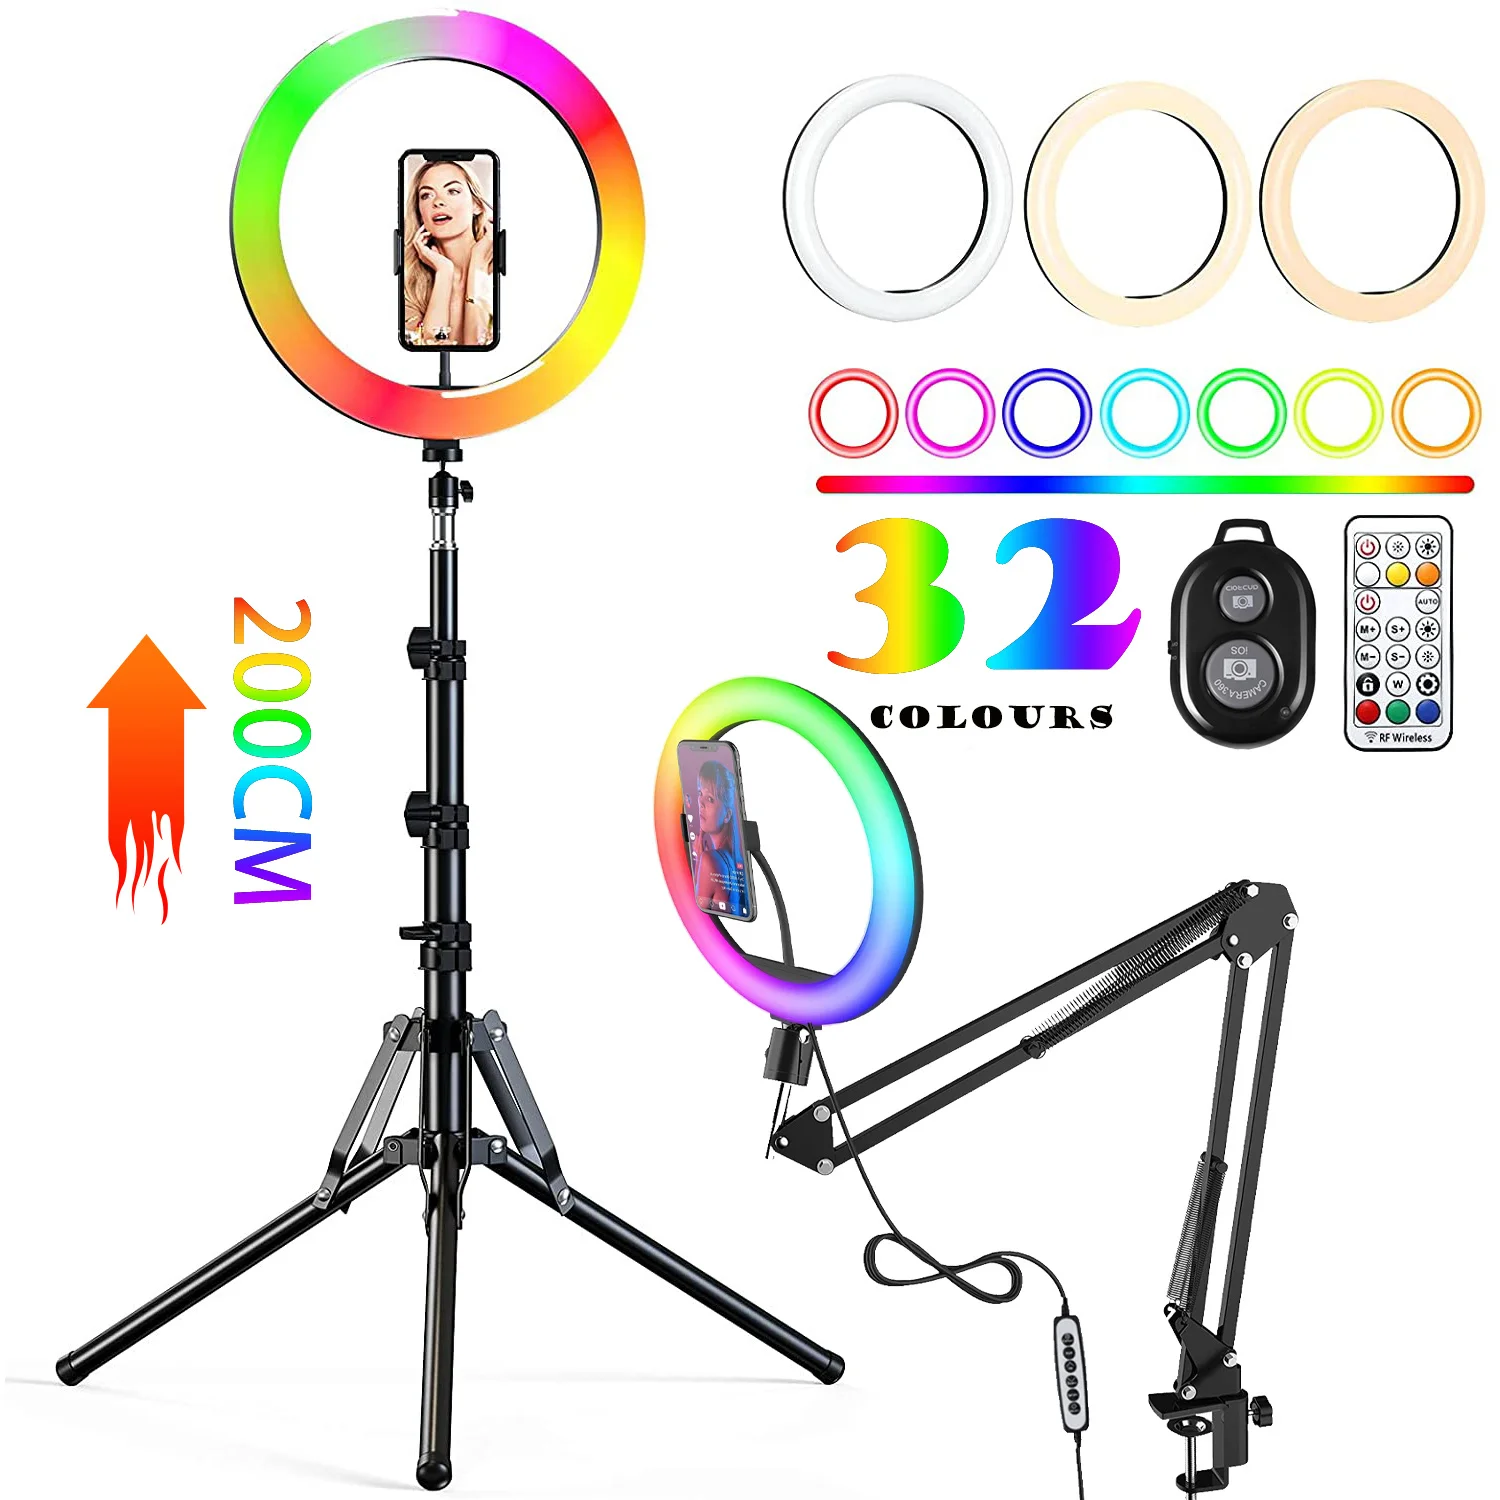 Color Soft Ring Light With Desk Long Arm Tablet Tripod Photography Lighting Selfie RingLight Circle Lamp Phone Holder Stand